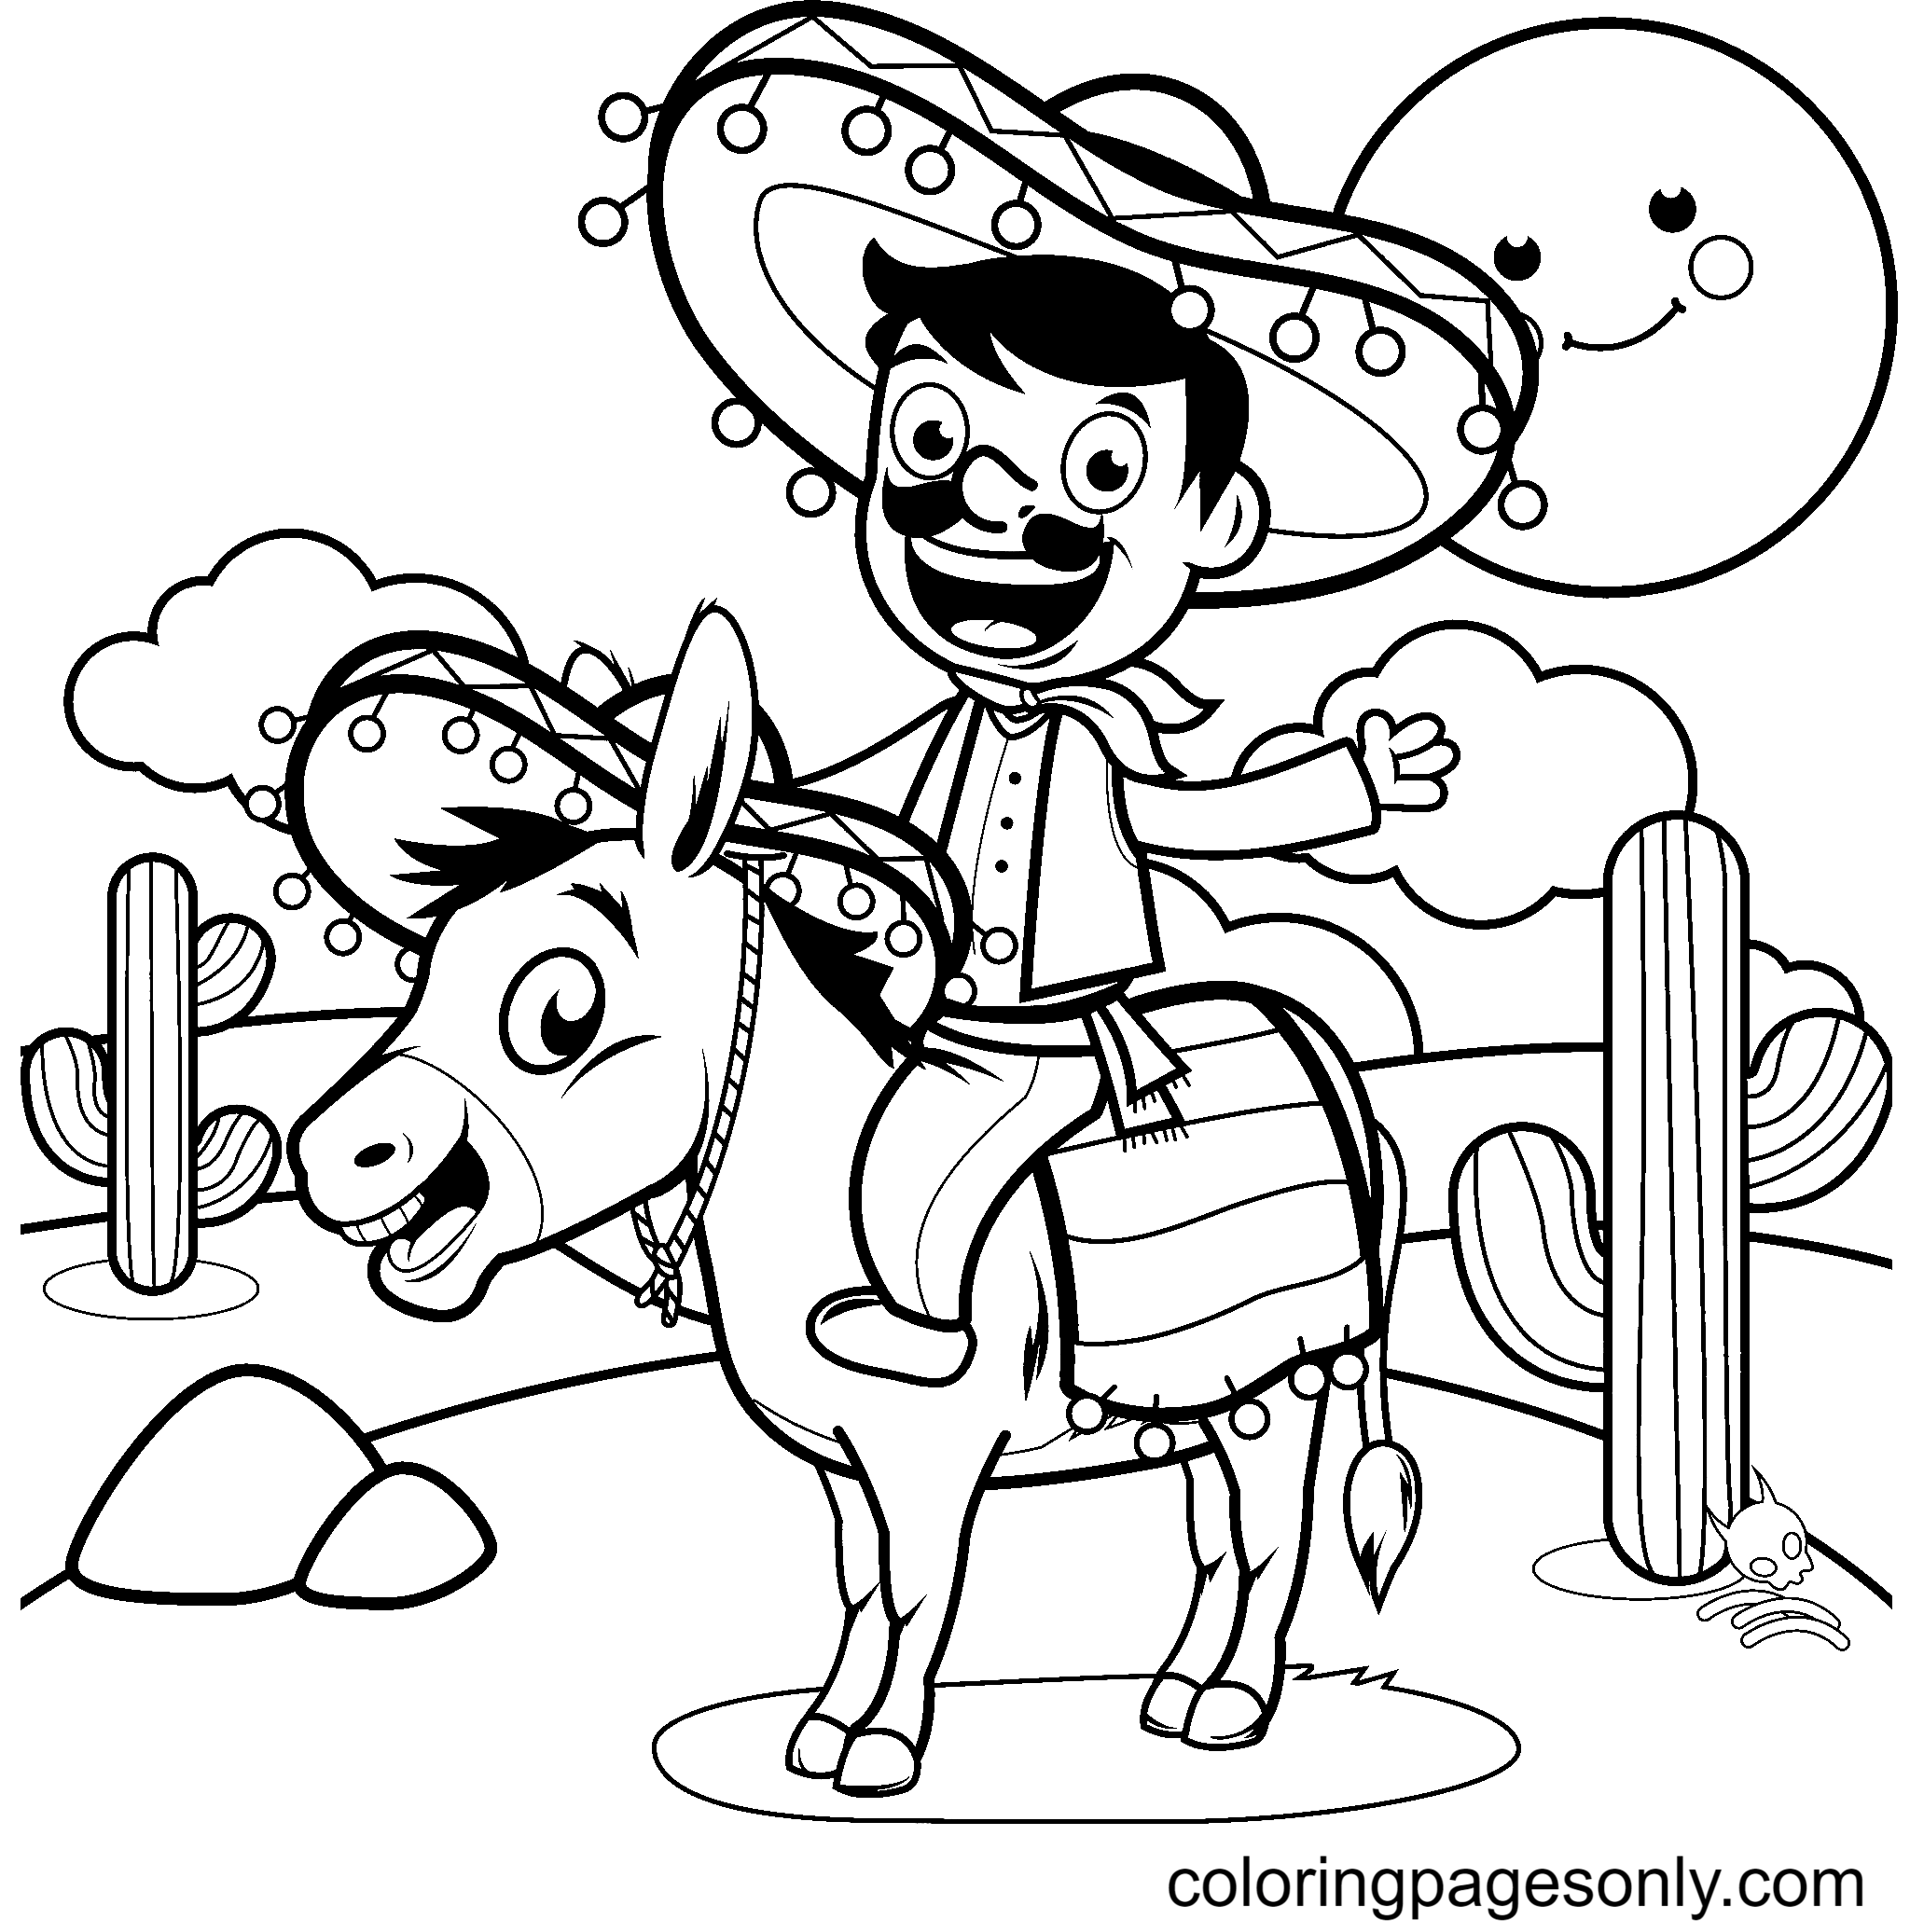 Mexican Man with Donkey Coloring Pages